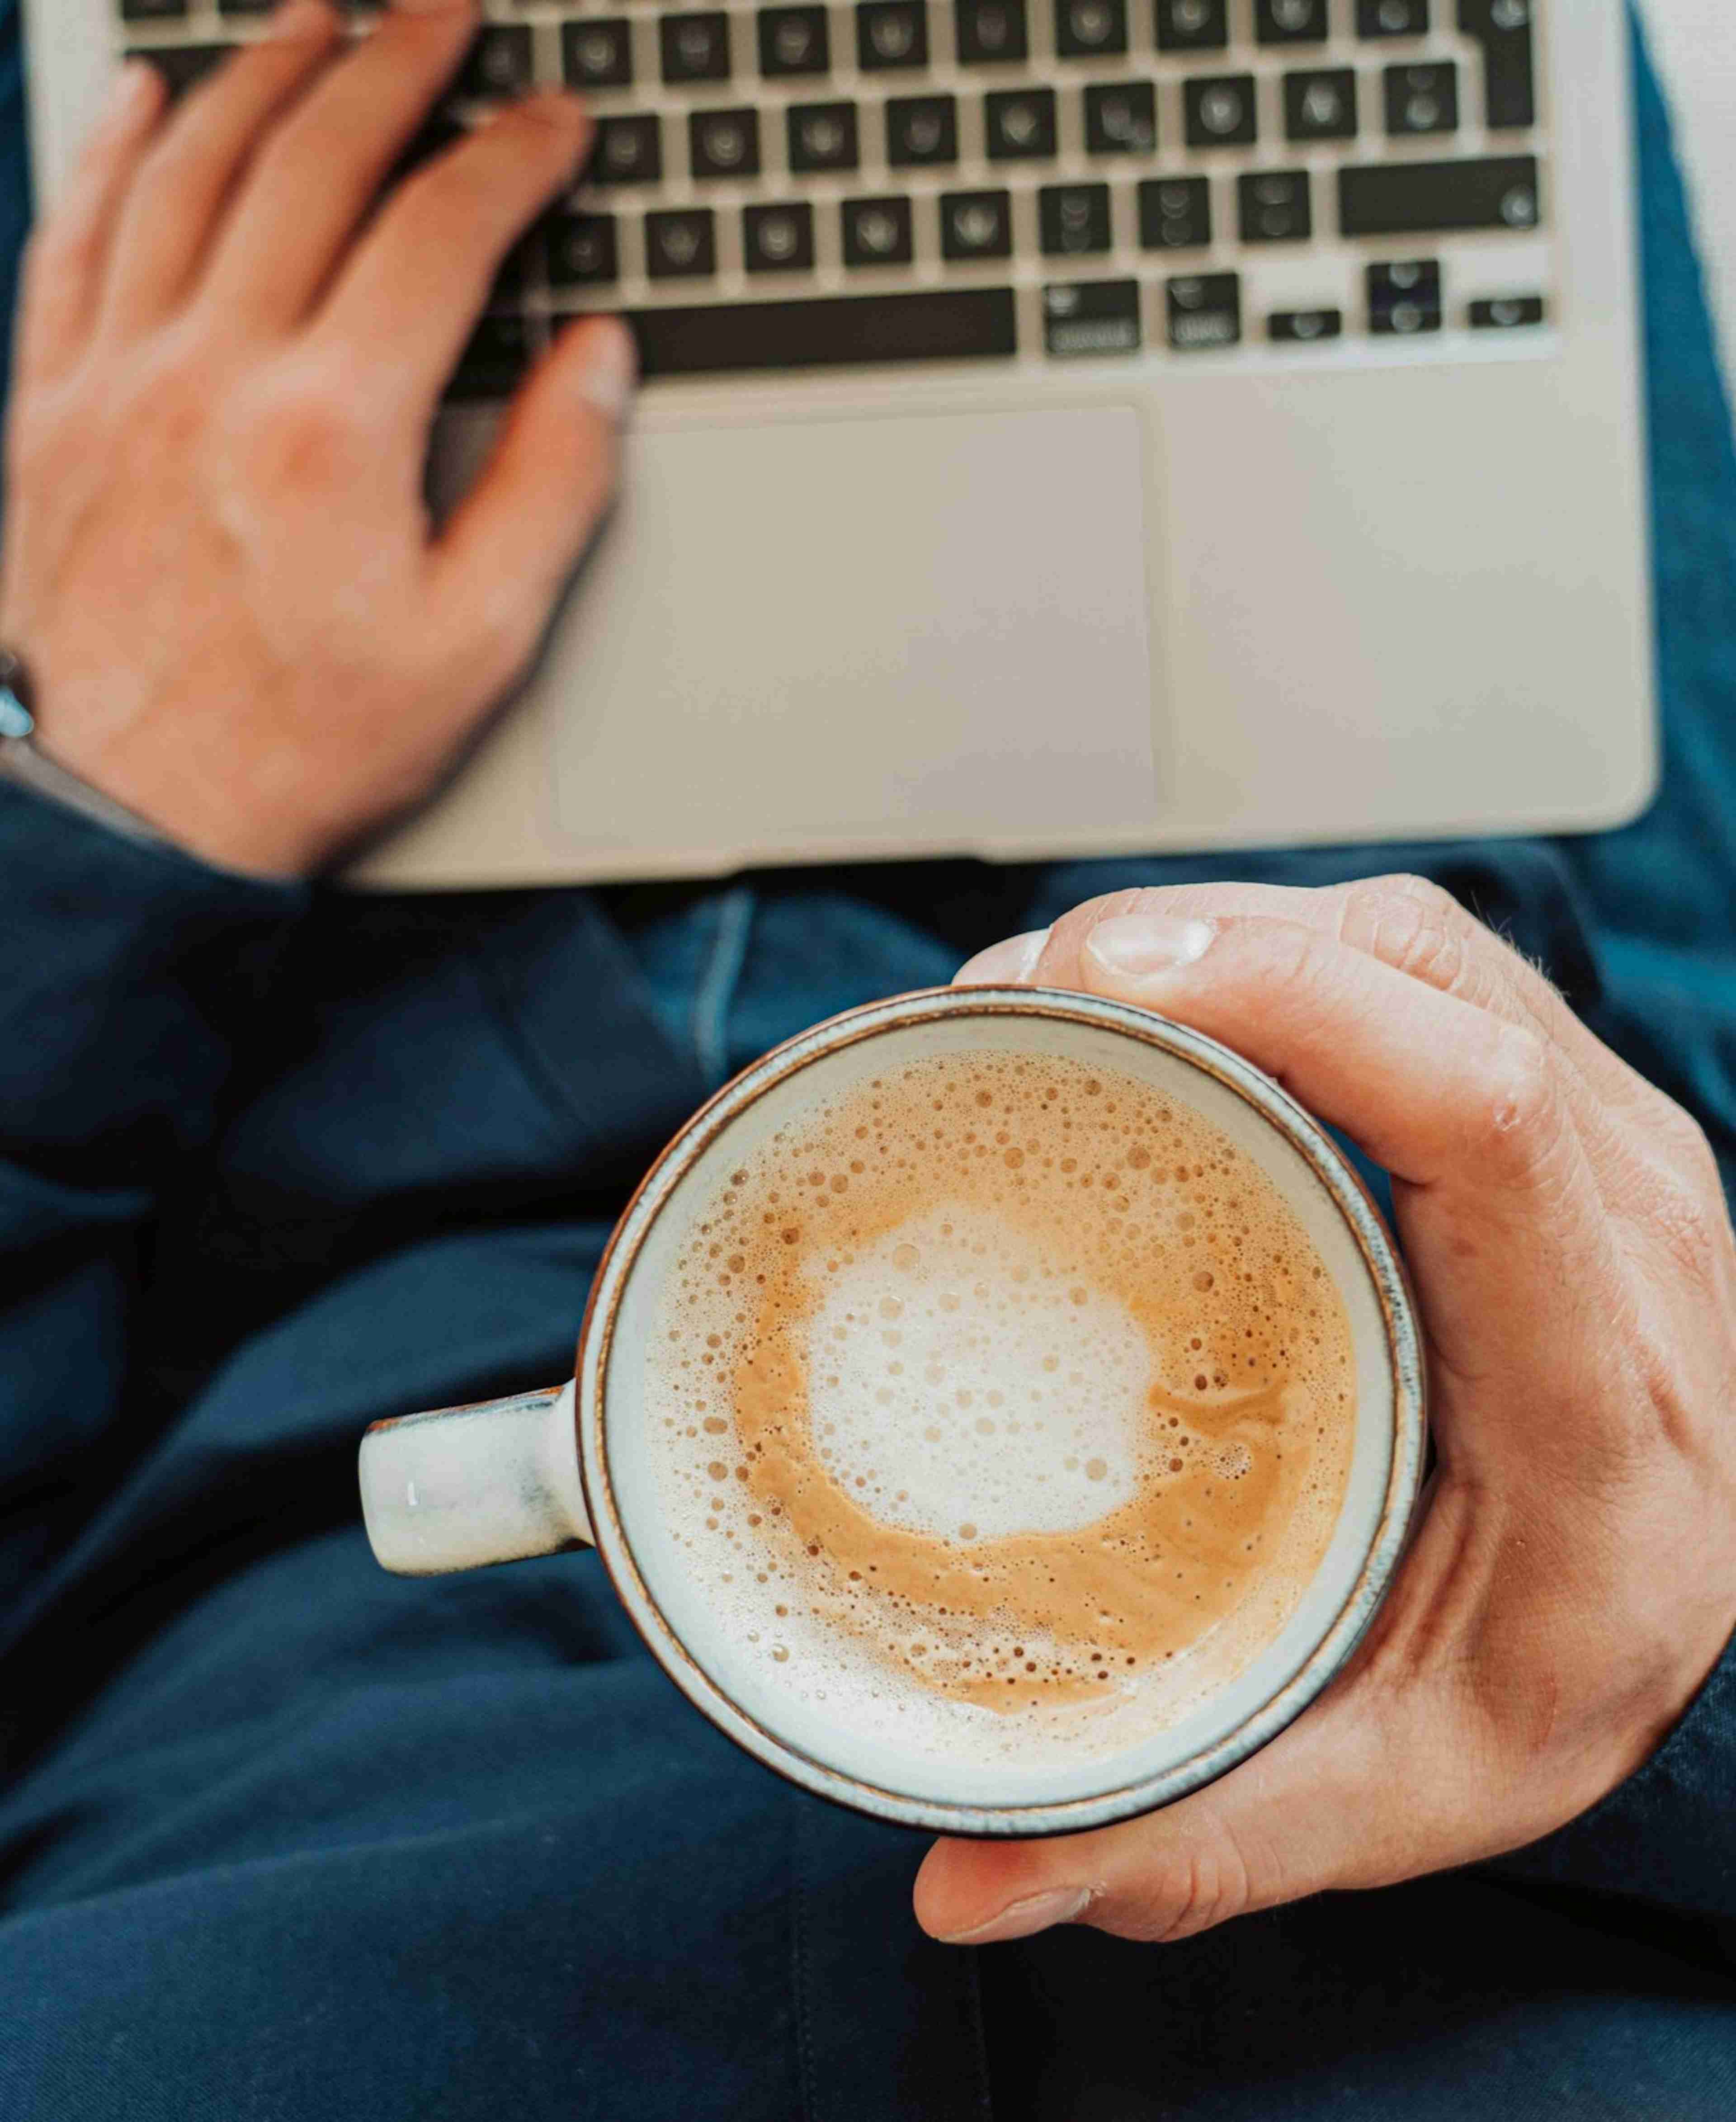 Man holding white ceramic mug with coffee in it whilst working on a MacBook Air